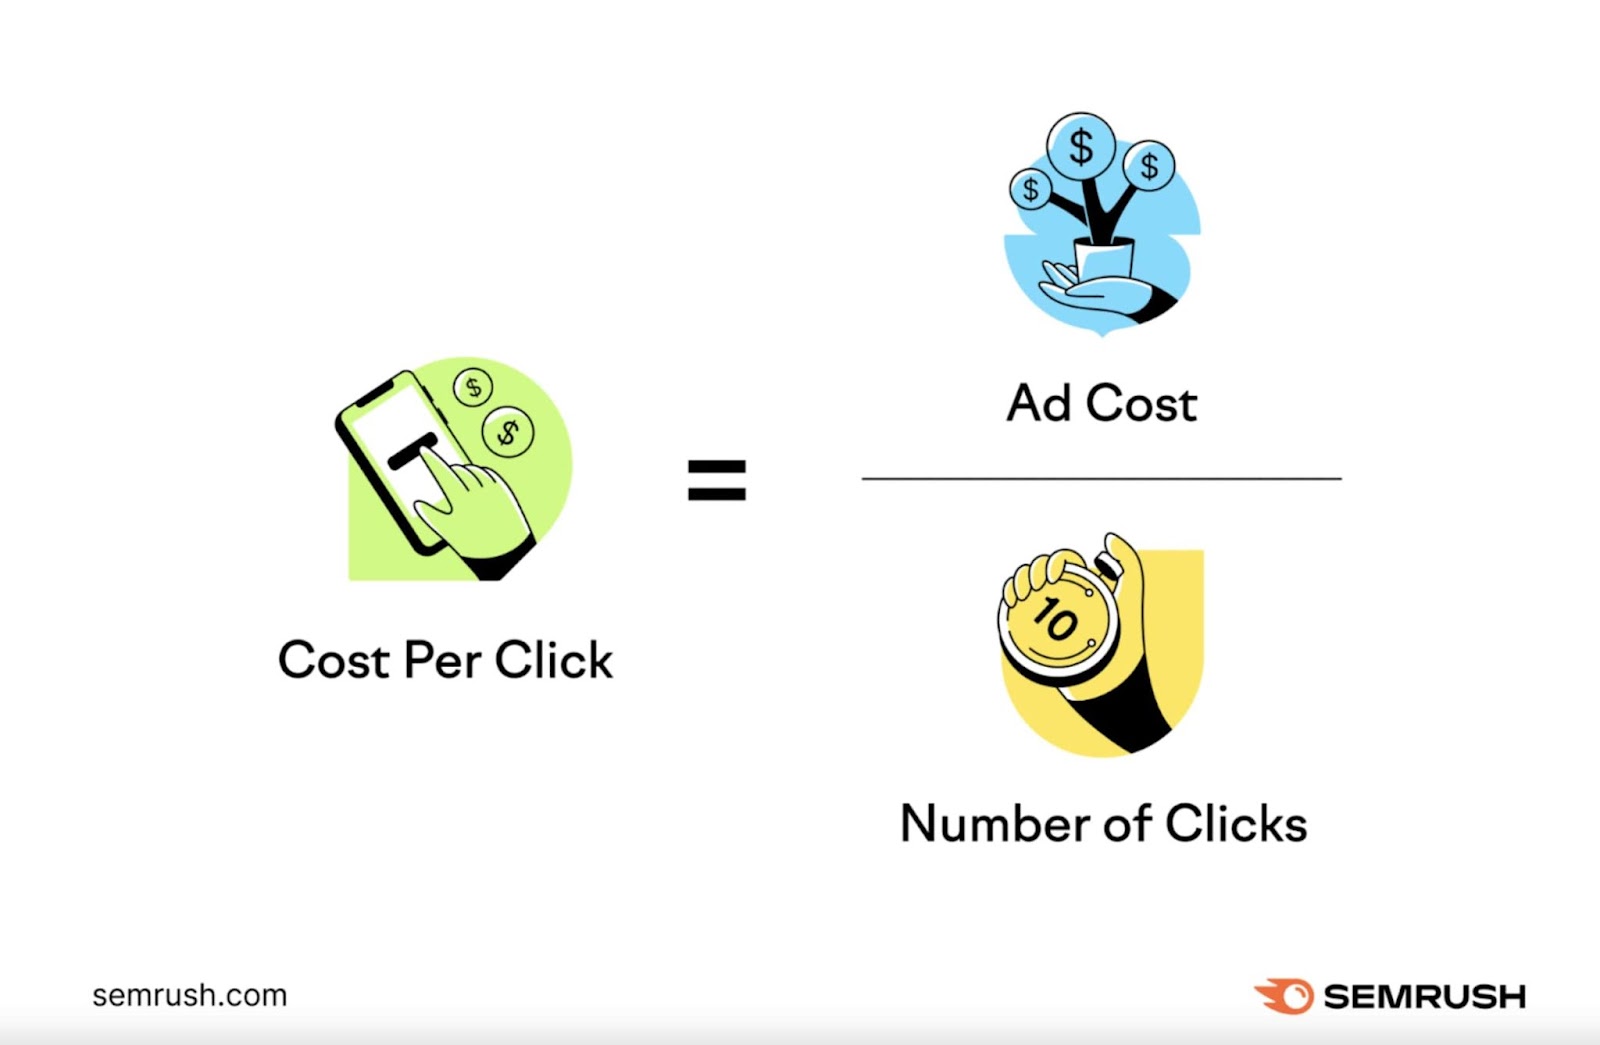 Cost per click (CPC) is calculated by dividing ad cost with number of clicks